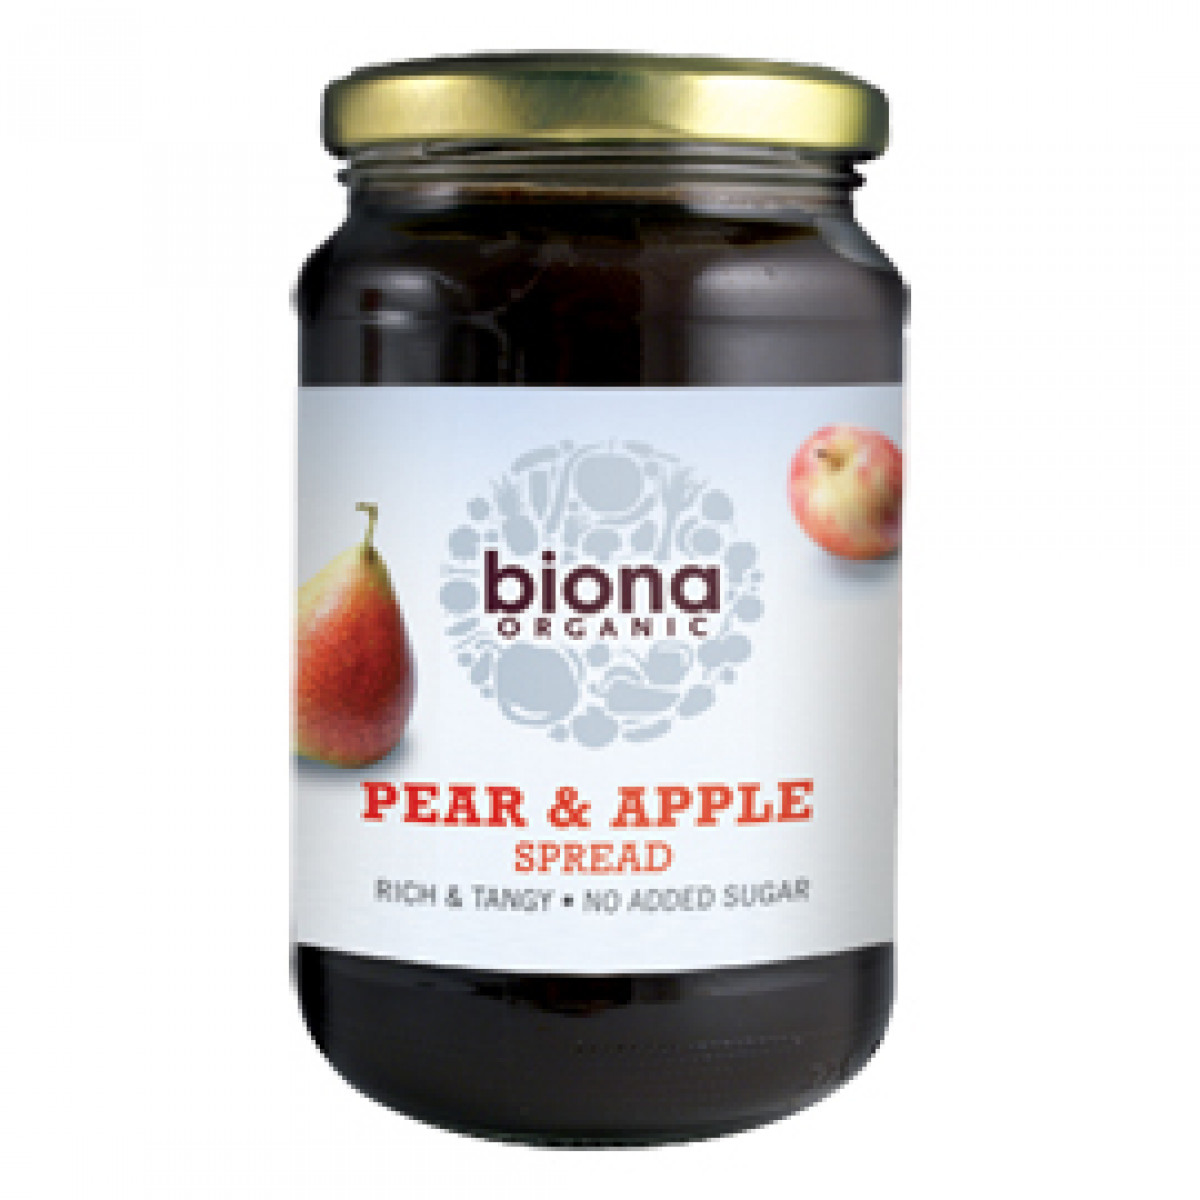 Product picture for Pear & Apple Spread